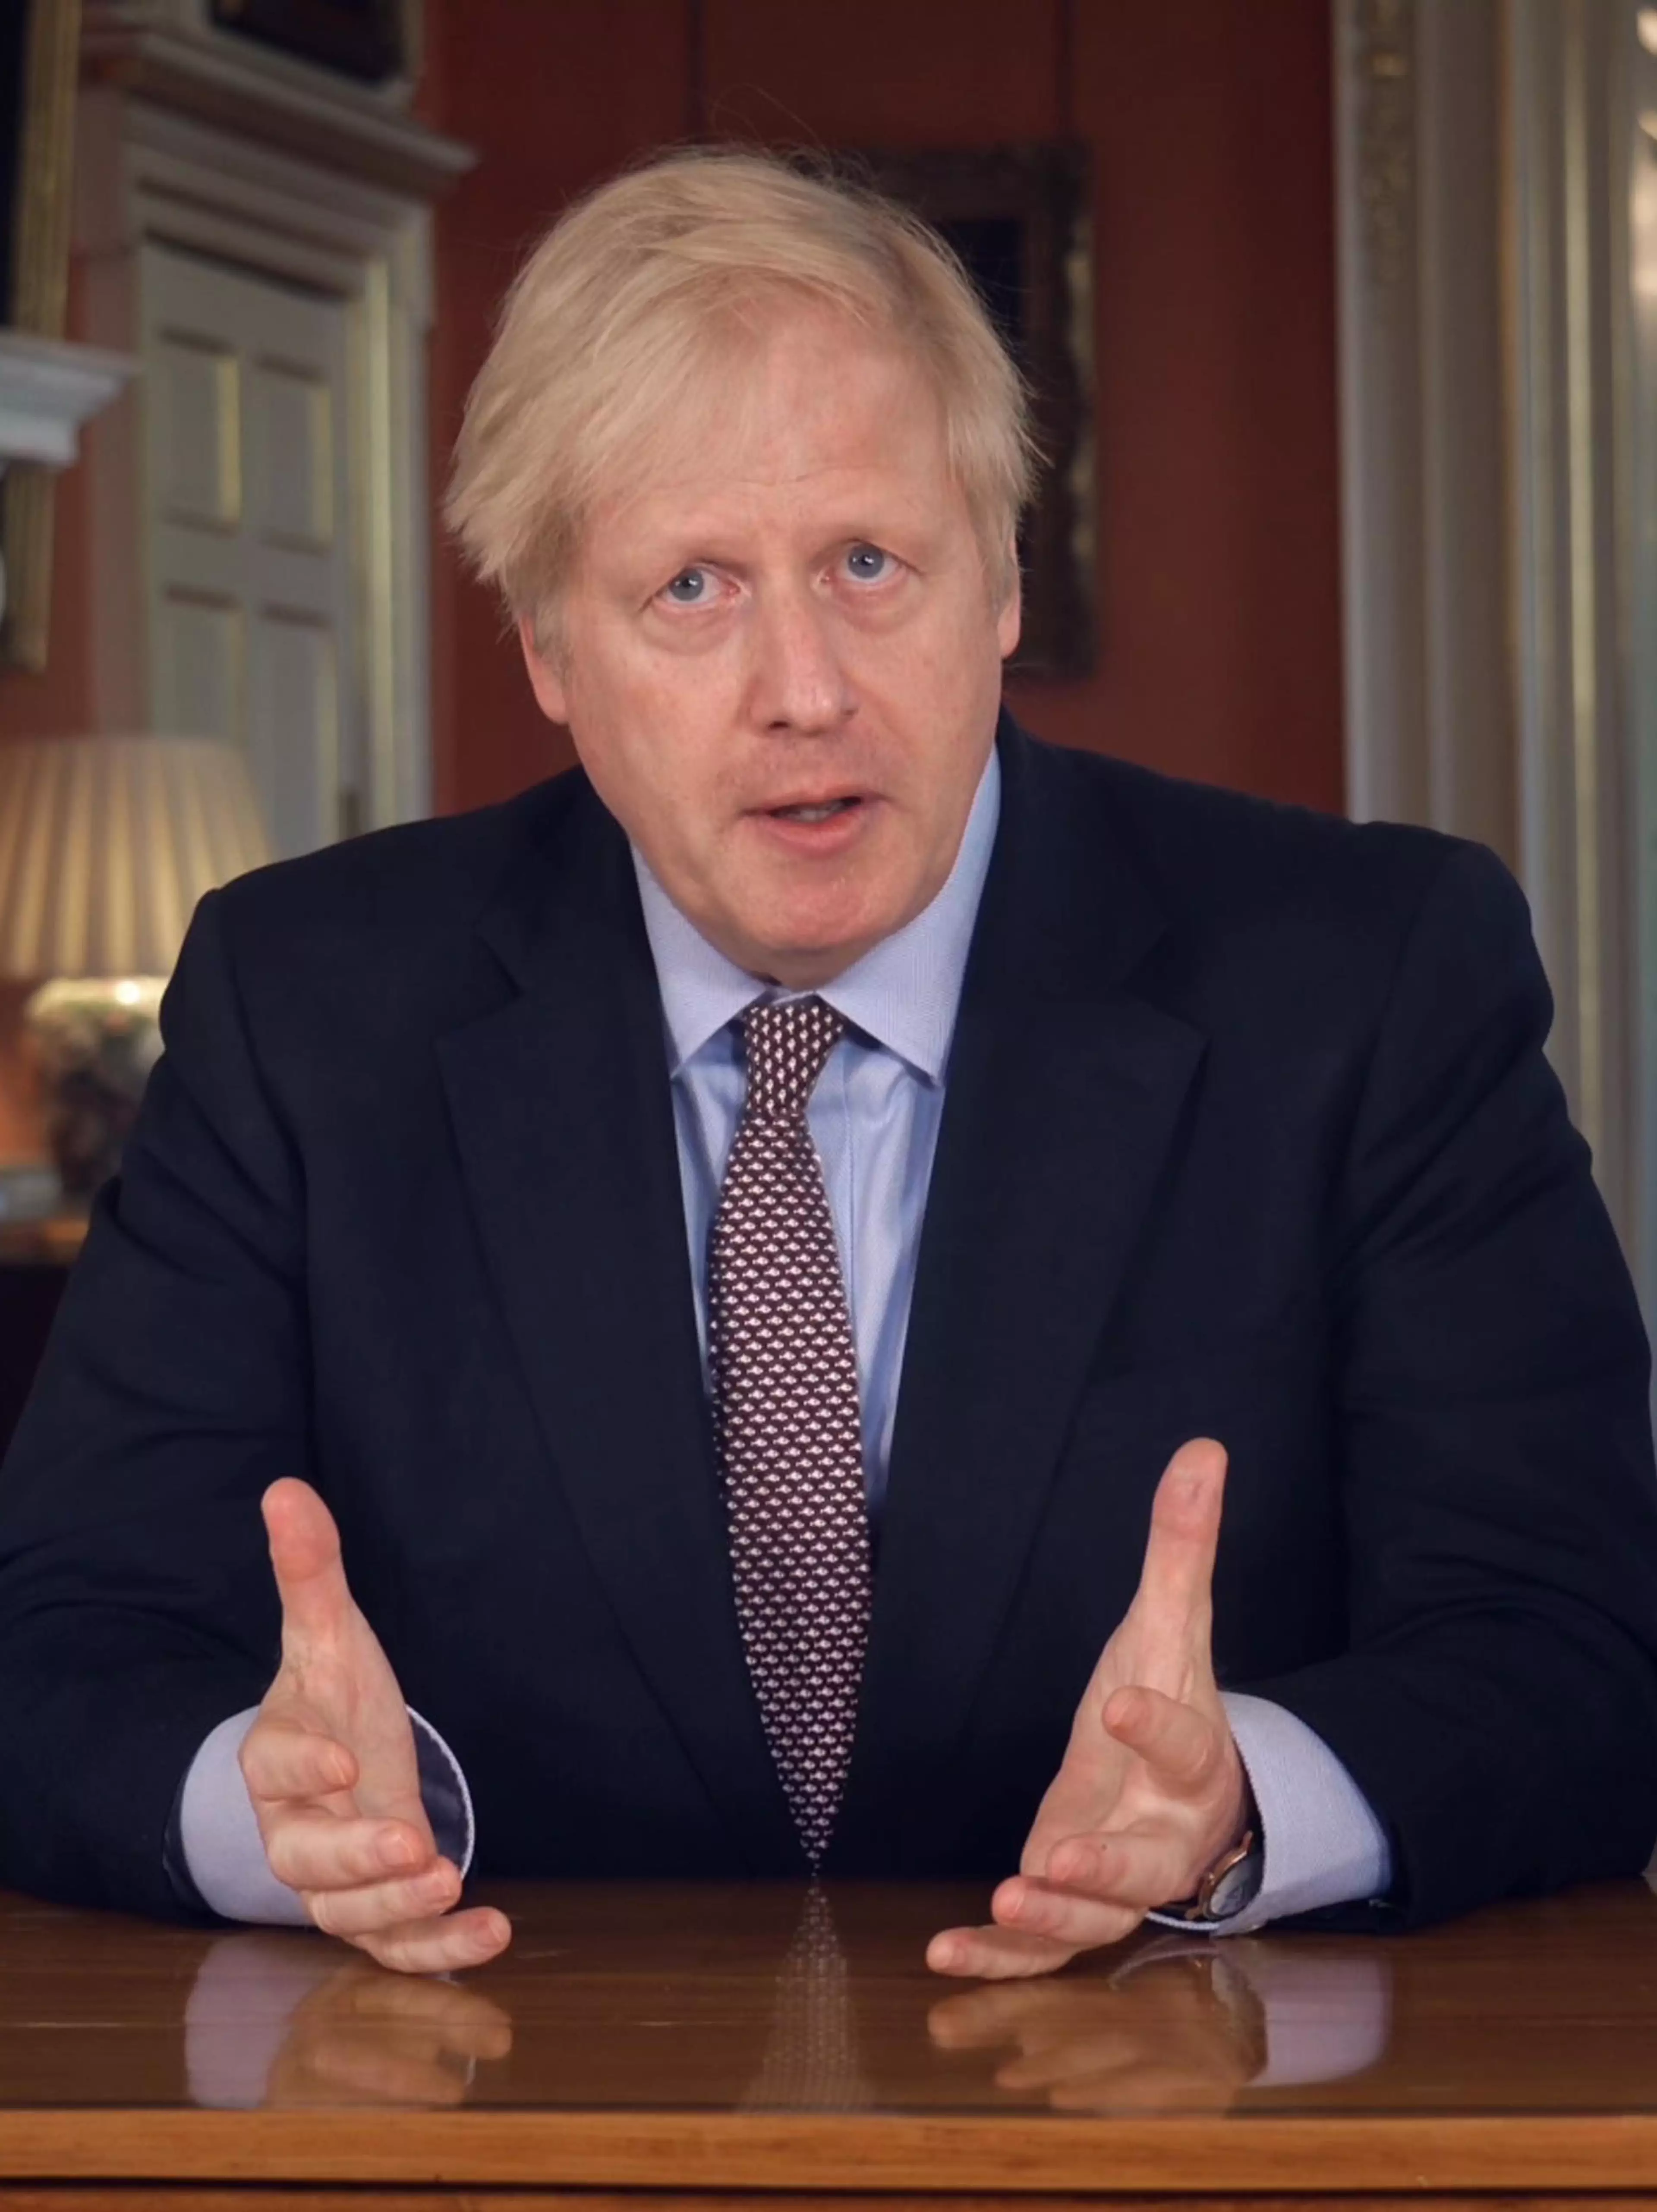 Boris Johnson has announced a relaxation in the lockdown measures.